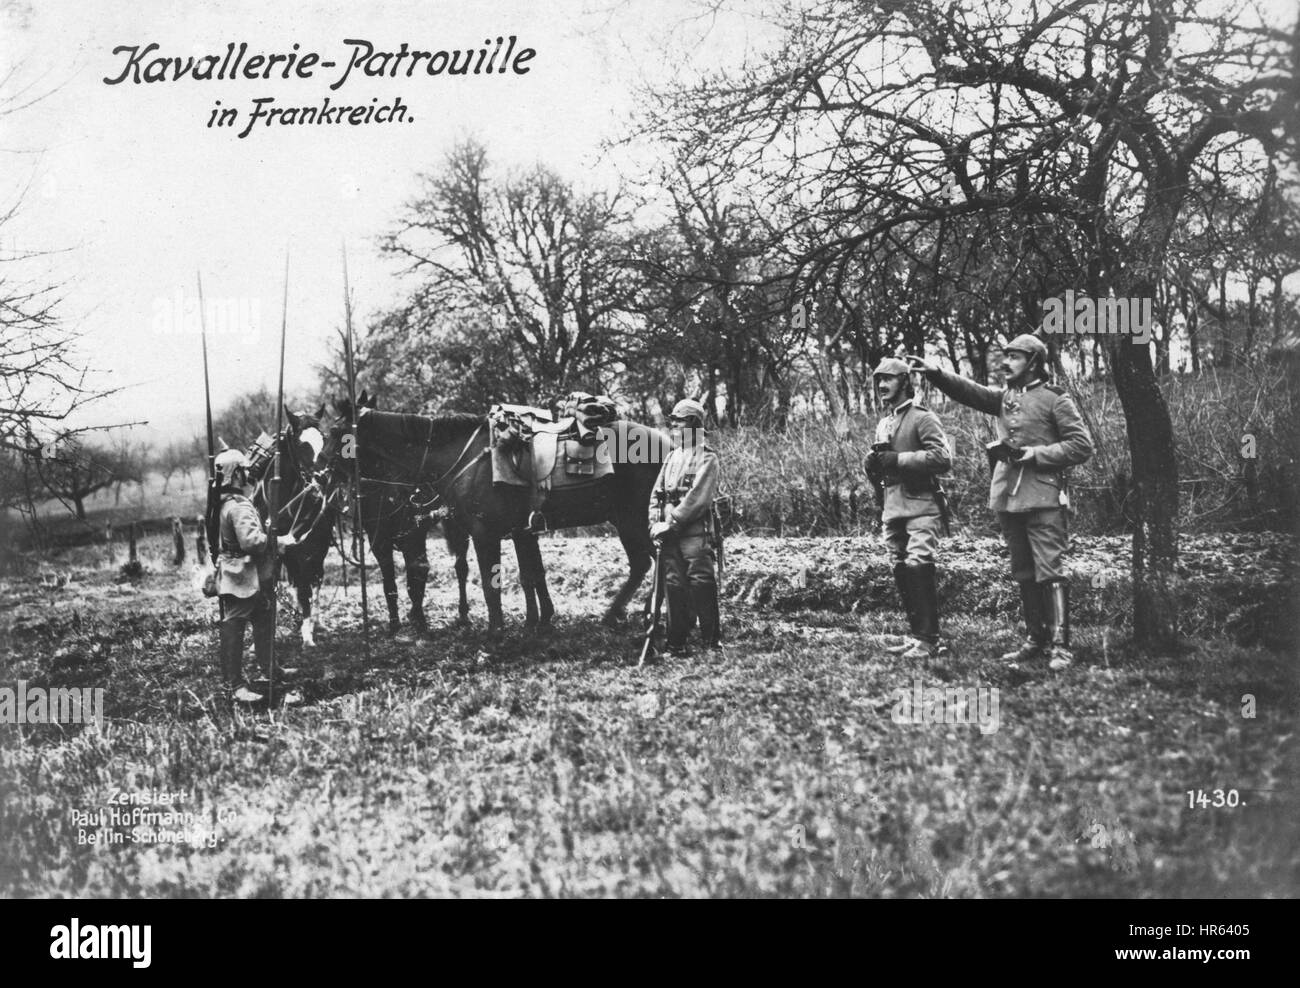 German WWII postcard depicting cavalry in France, 1915. From the New York Public Library. Stock Photo